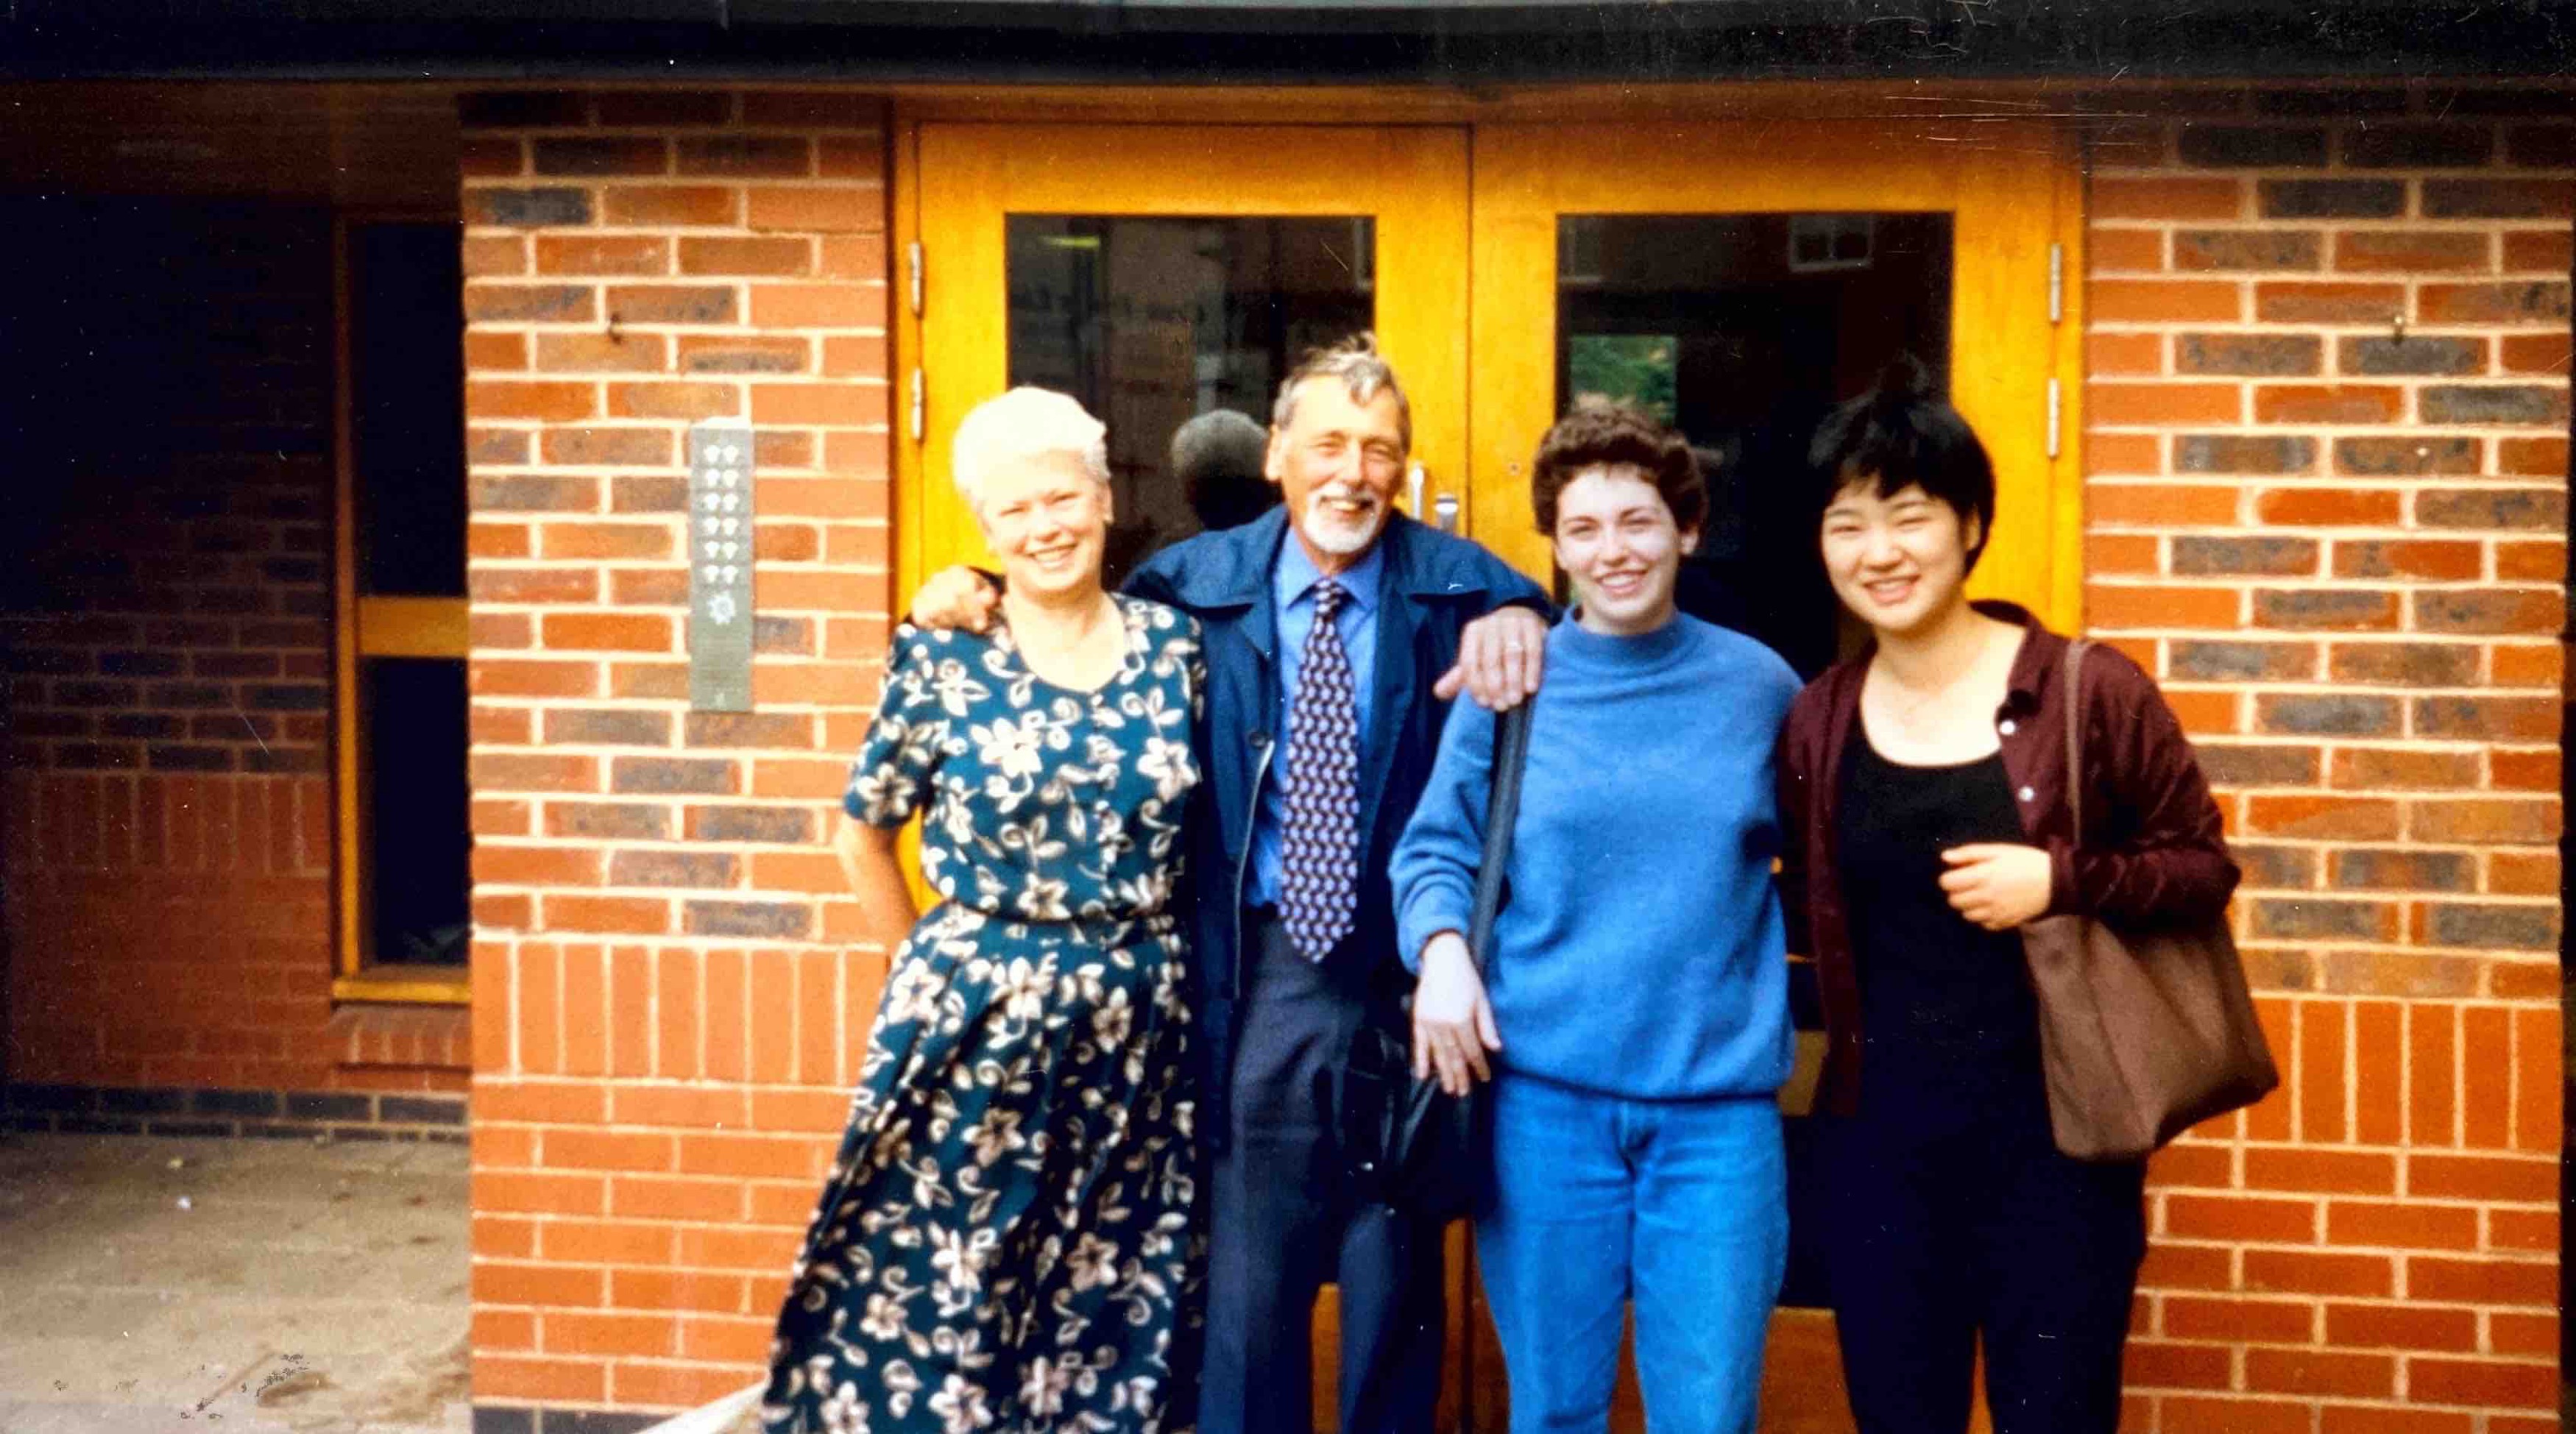 Annette, her parents and friend Nozomi outside Arthur Vic accommodation on campus.